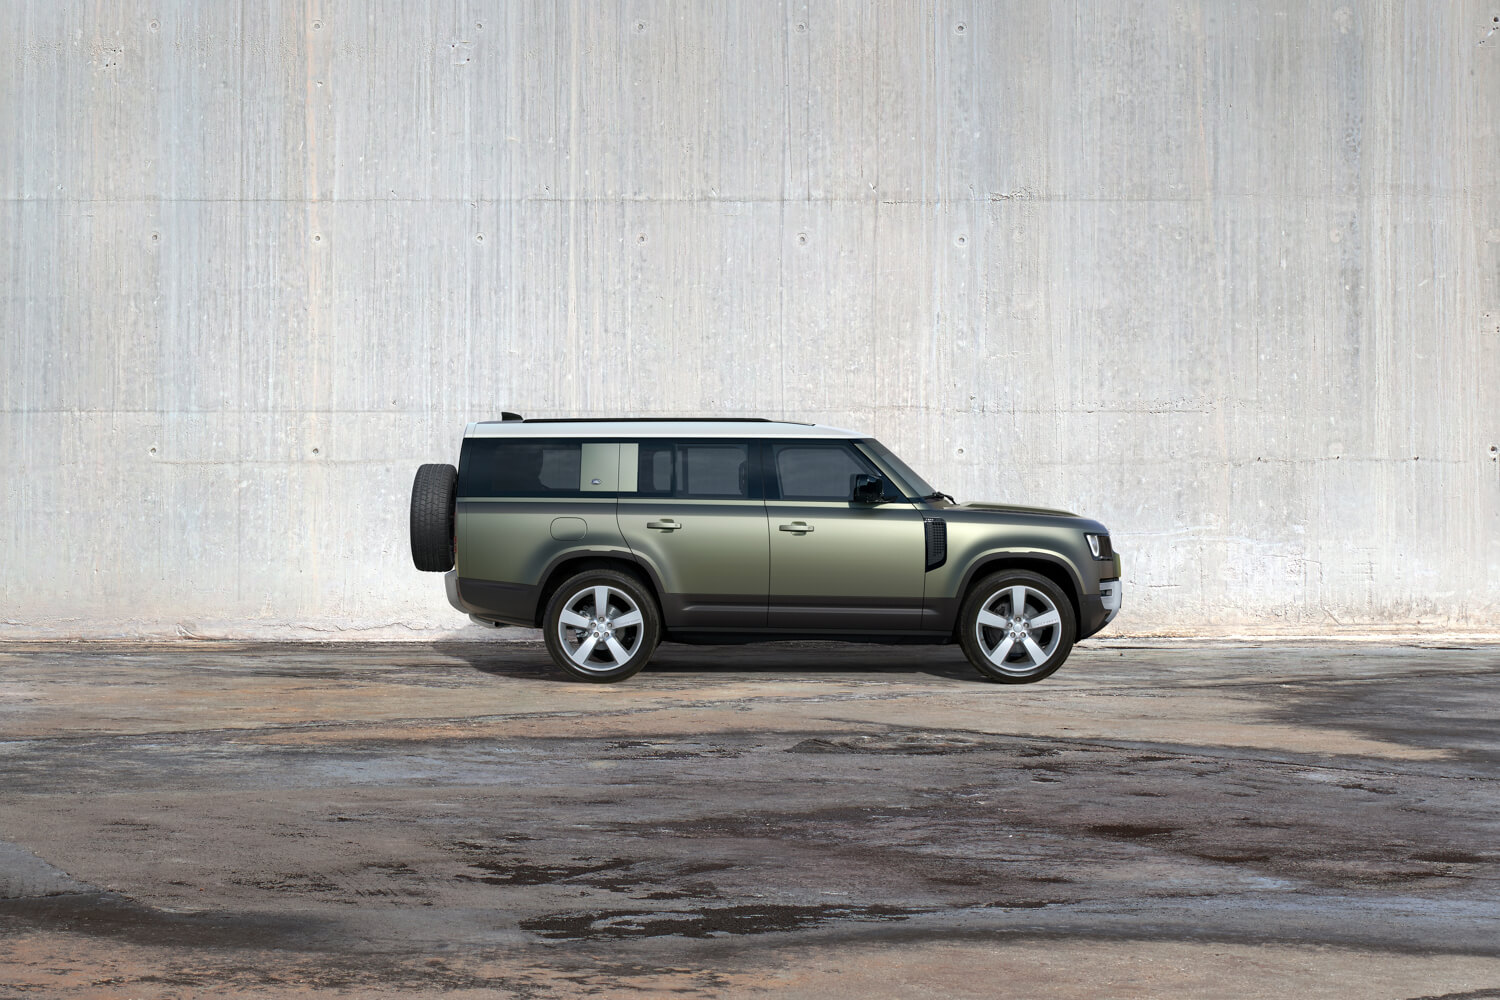 Land Rover Defender 130 gets eight seats